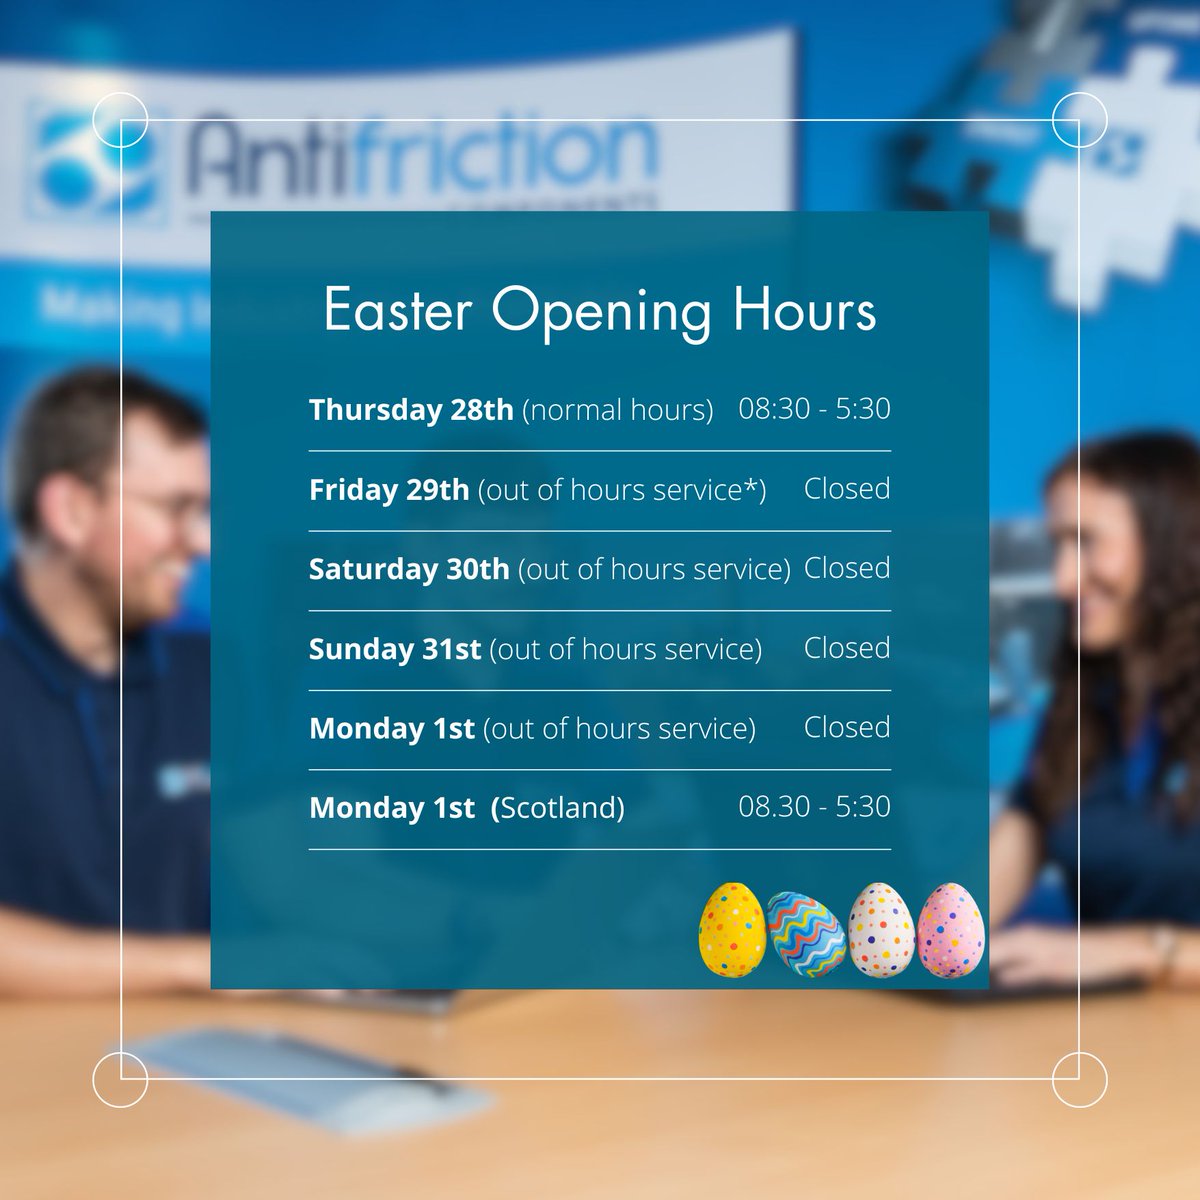 Antifriction are proud to support their customers 24/7, 365 days a year. Here are our office and trade counter Easter opening hours. During the bank holidays we are still able to help you via our out of hours service on the same phone number as usual antifriction.co.uk/locations/